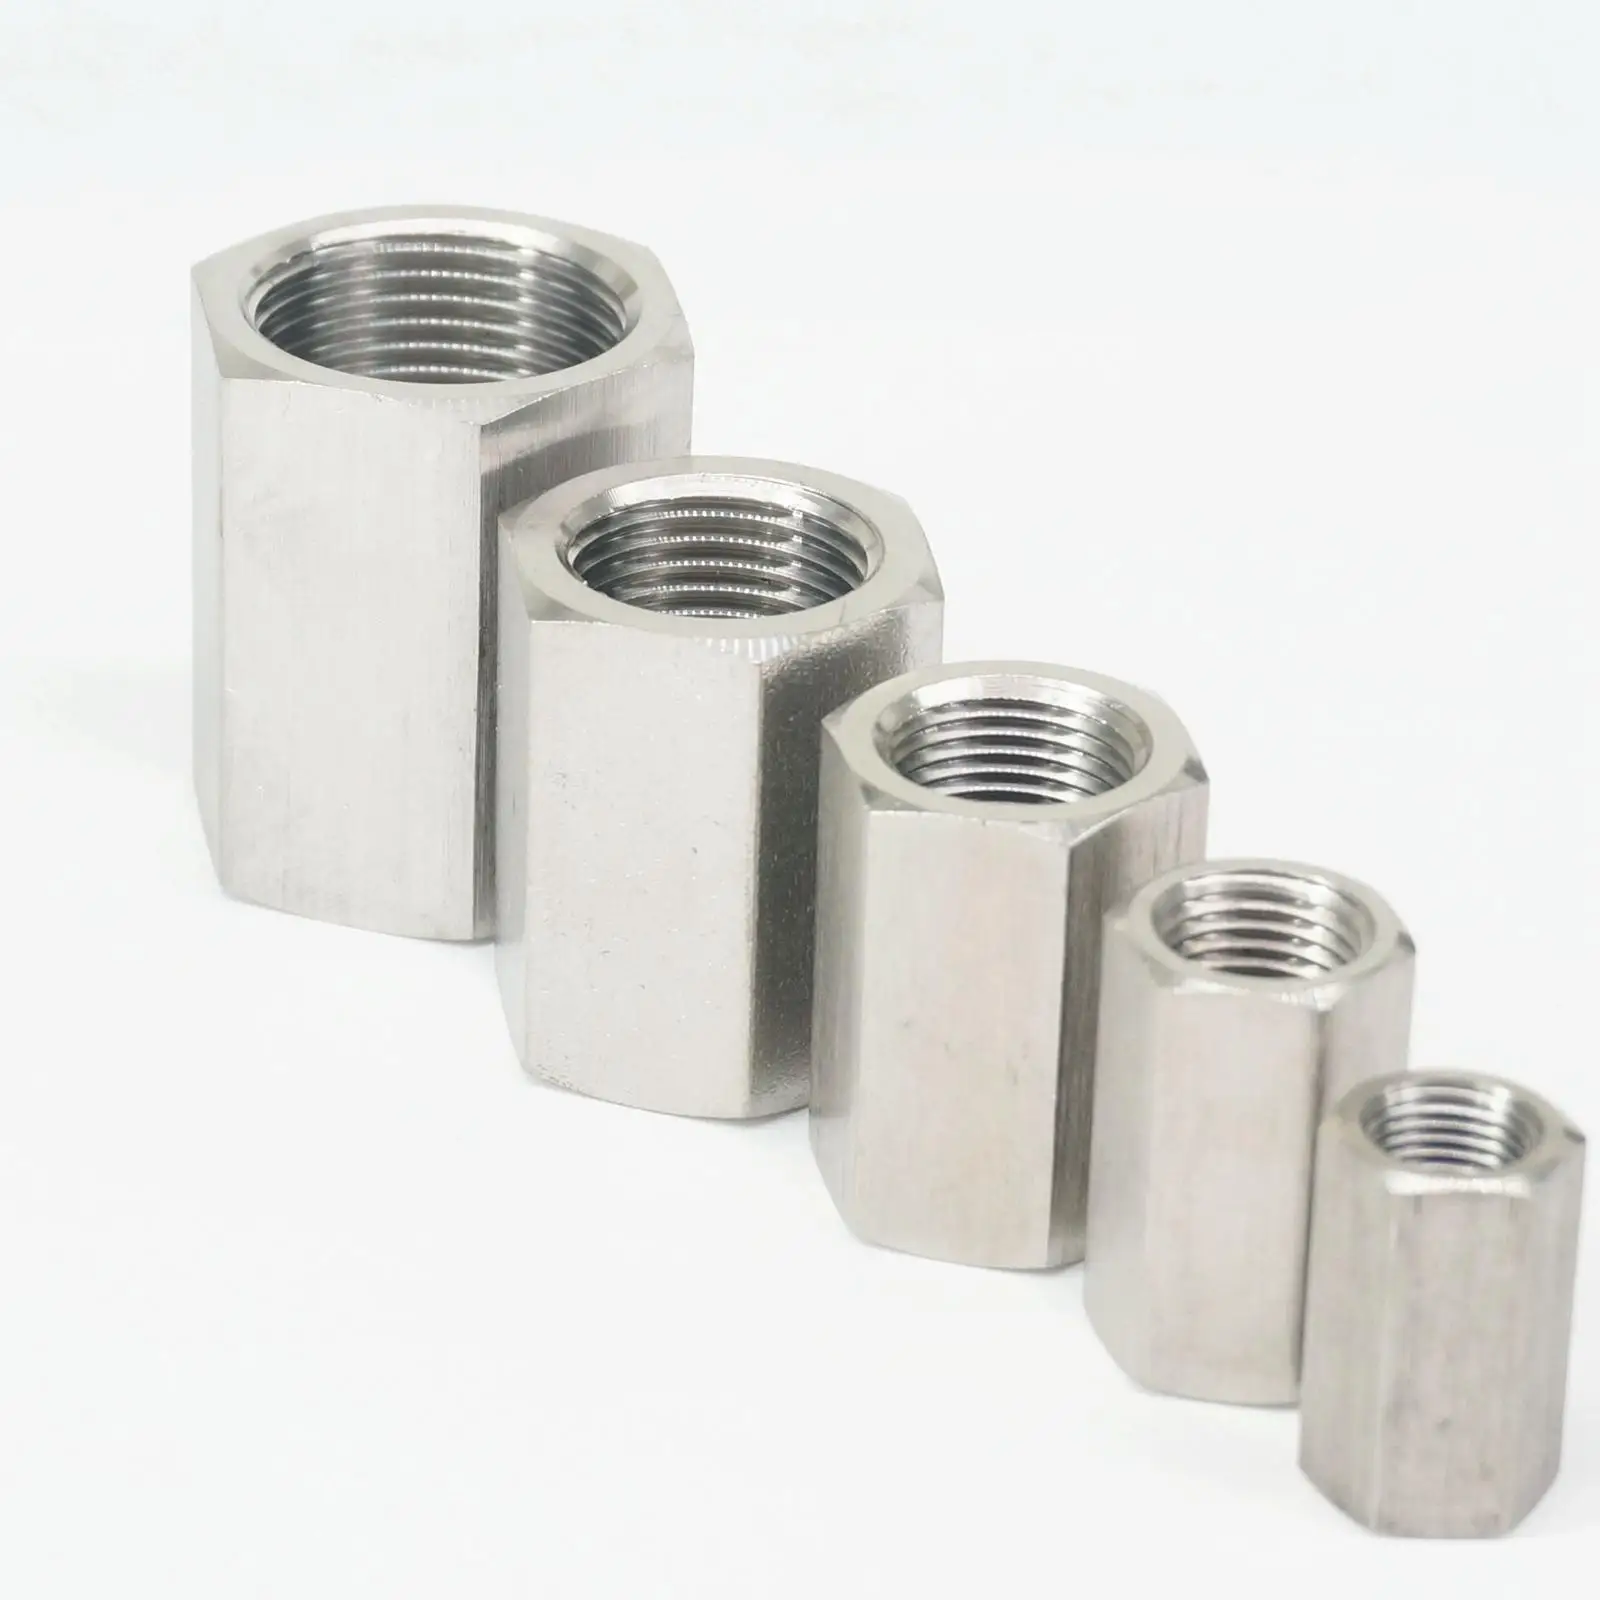 1/8" 1/4" 3/8" 1/2" 3/4" 1" BSPP M8 M10 M14 M16 M18 M20 Female 304 Stainless Hex Nut Rod Pipe Adapters Max Pressure 8000 psi